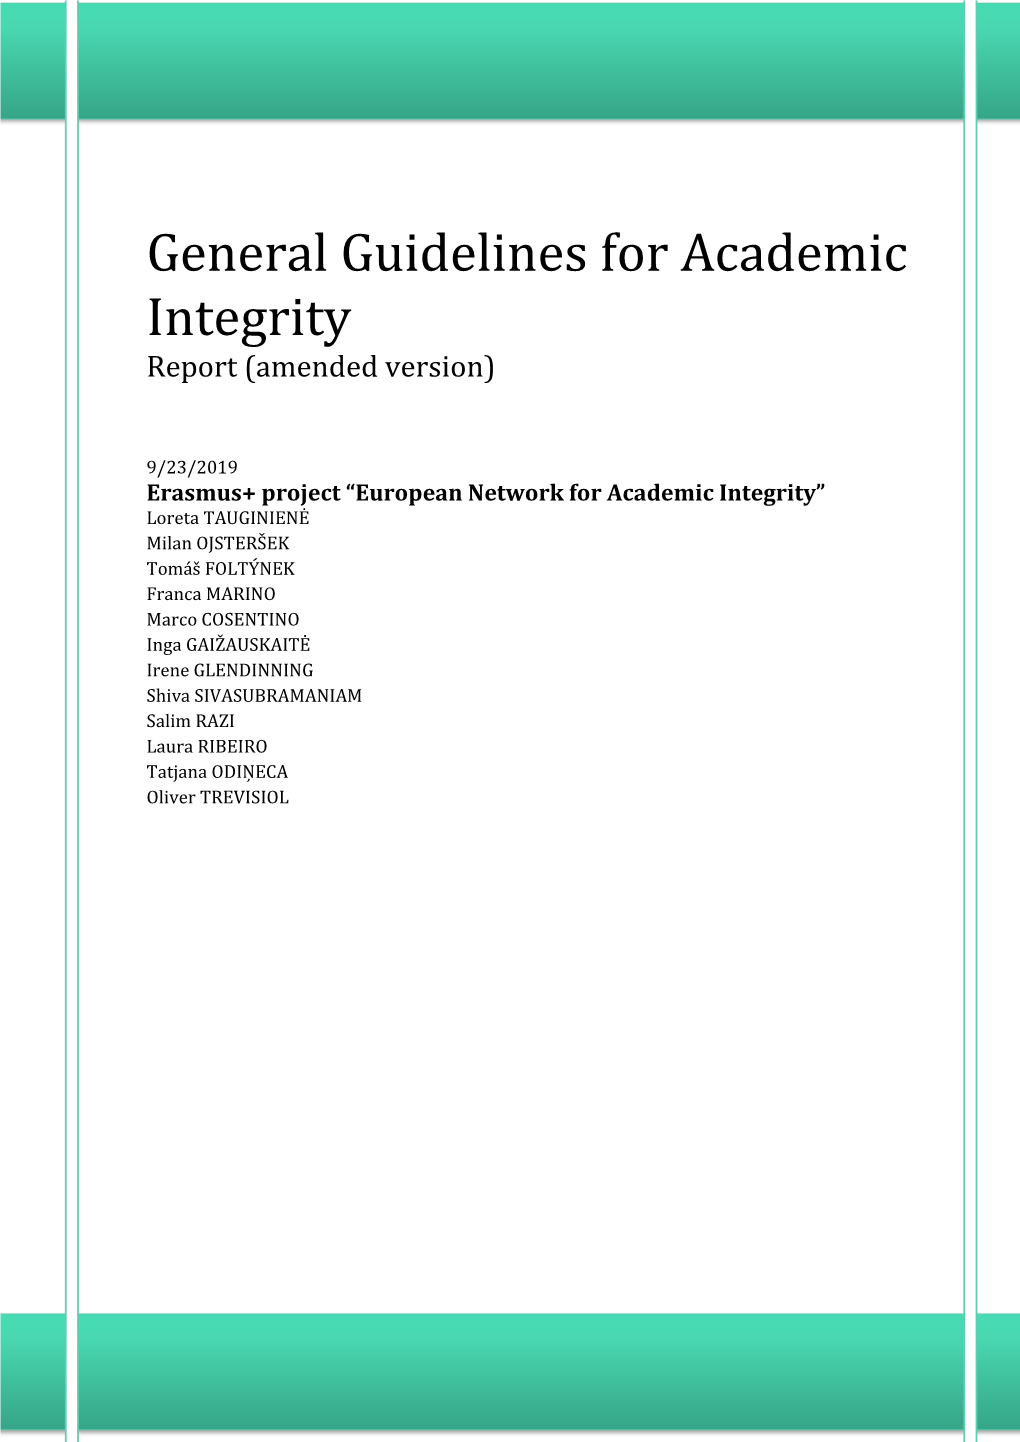 General Guidelines for Academic Integrity Report (Amended Version)